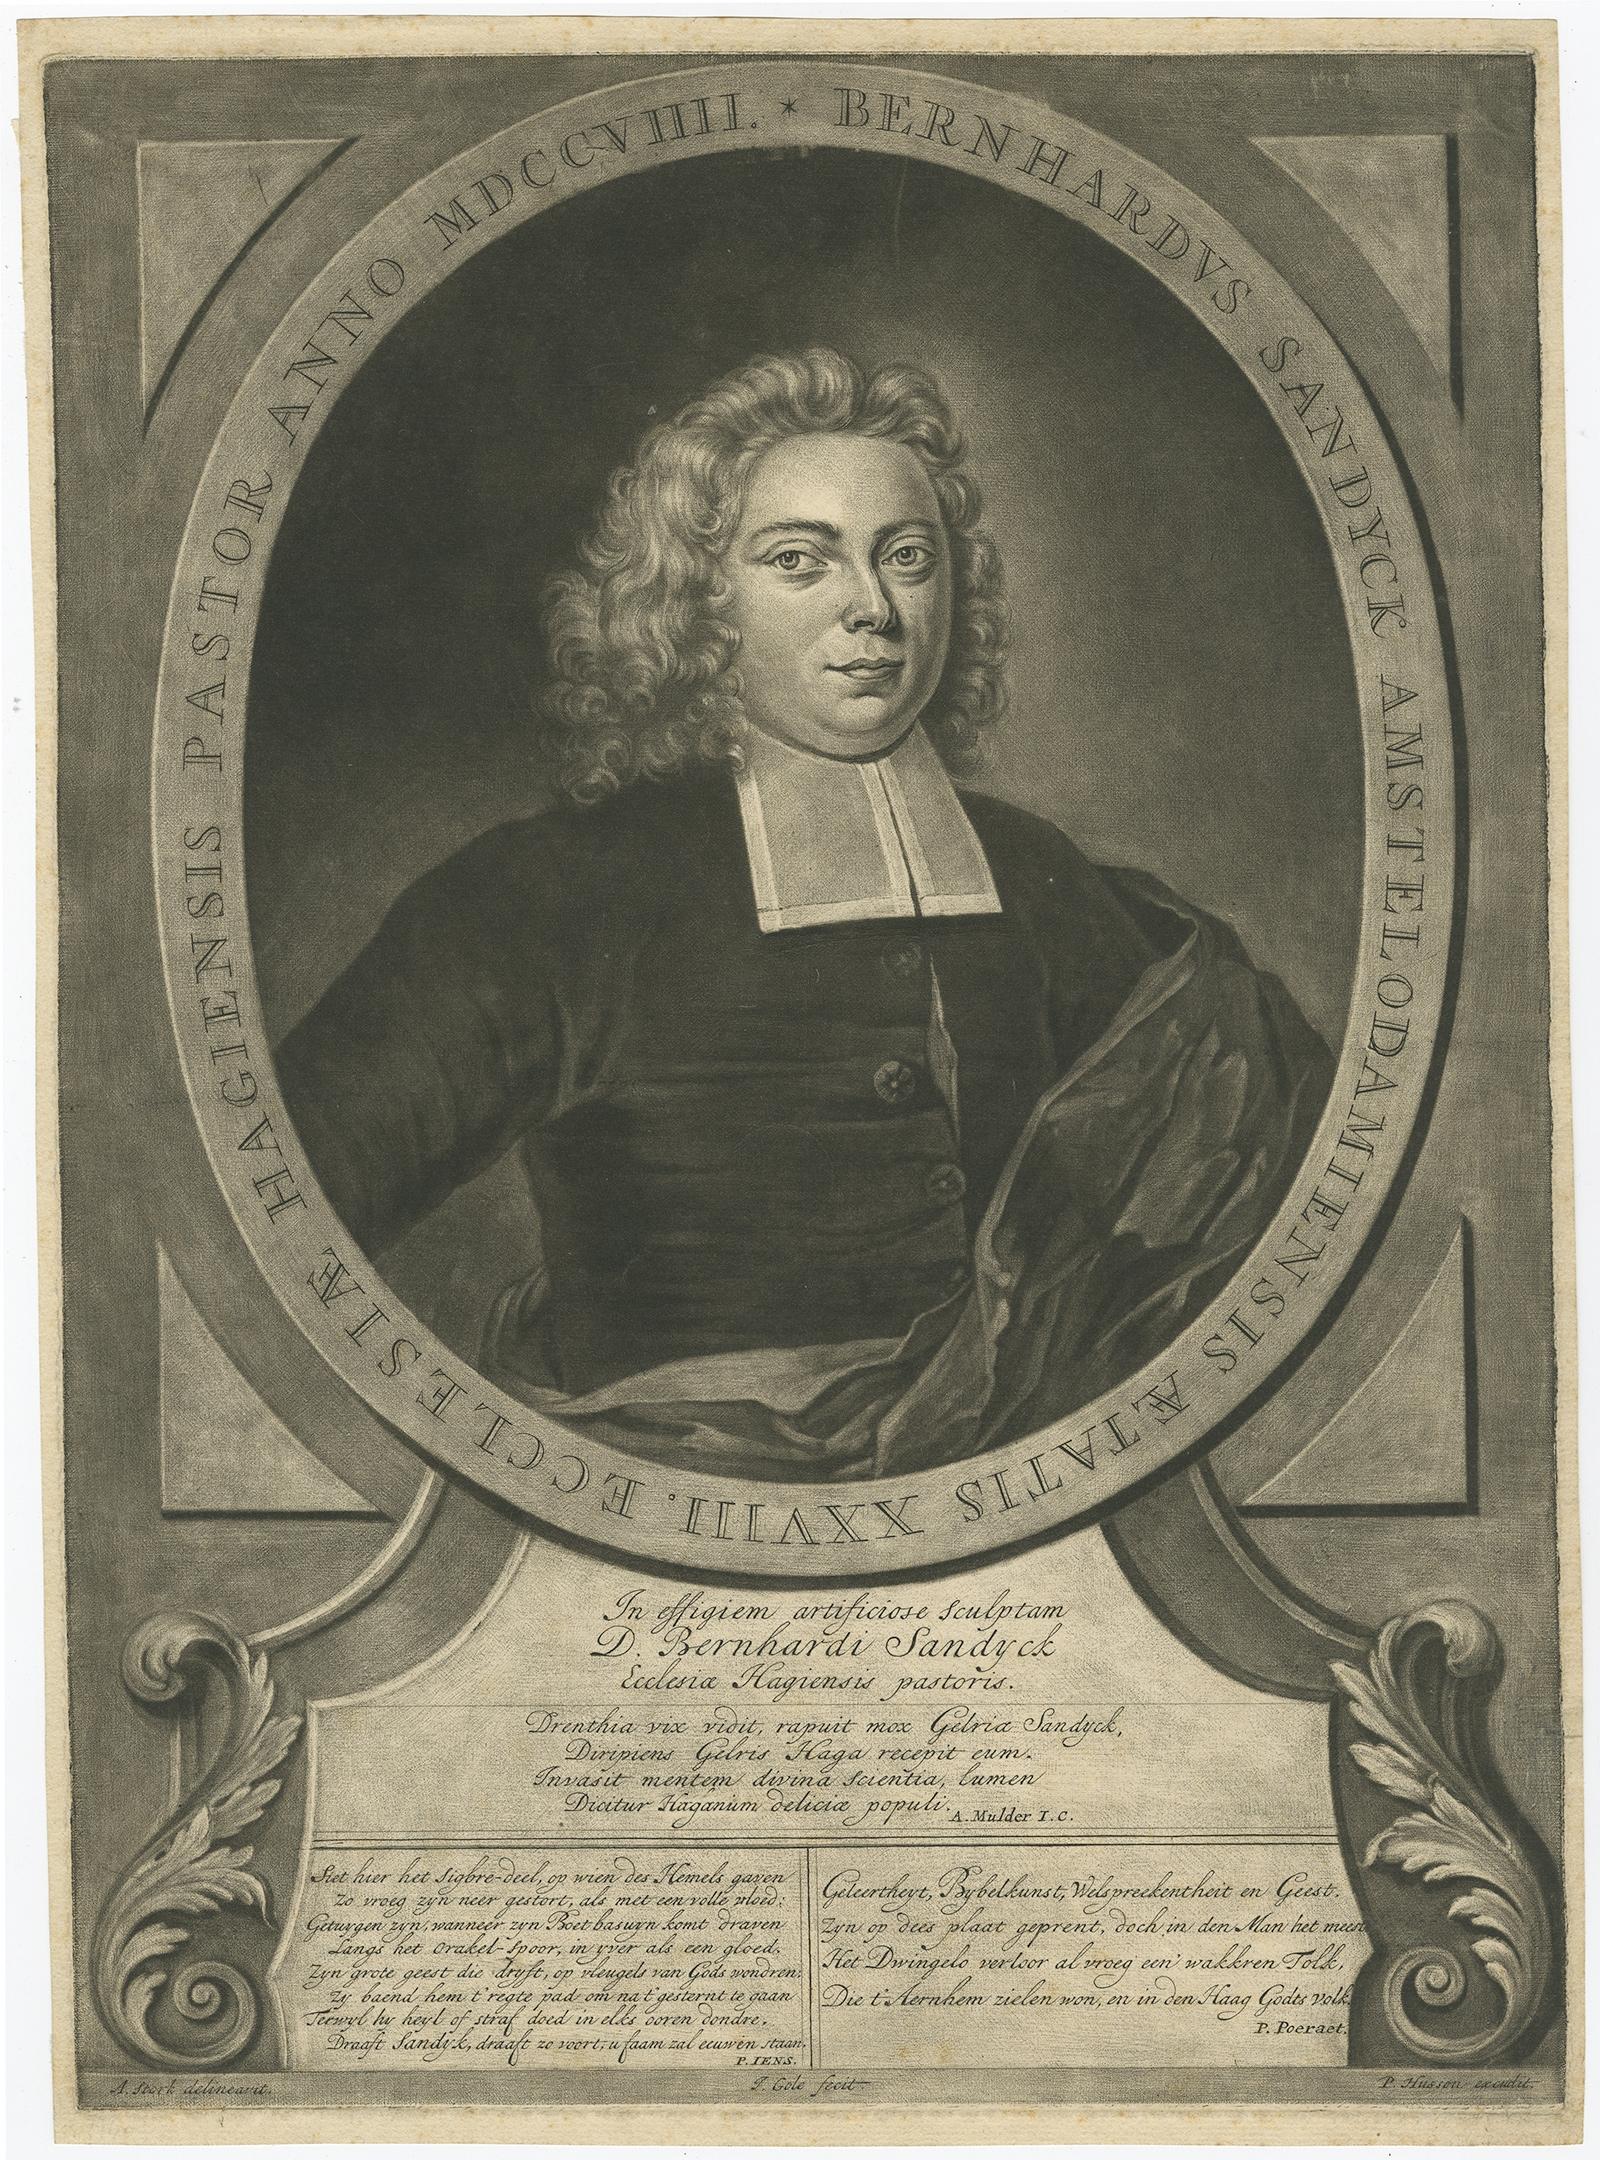 Antique print, titled: 'Bernhardus Sandyck Amstelodamiensis (…)' 

This plate shows a portrait of Bernhard Sandyck (1680 - 1727), a Dutch protestant minister from Amsterdam.

Source unknown, to be determined.

Artists and Engravers: Made by